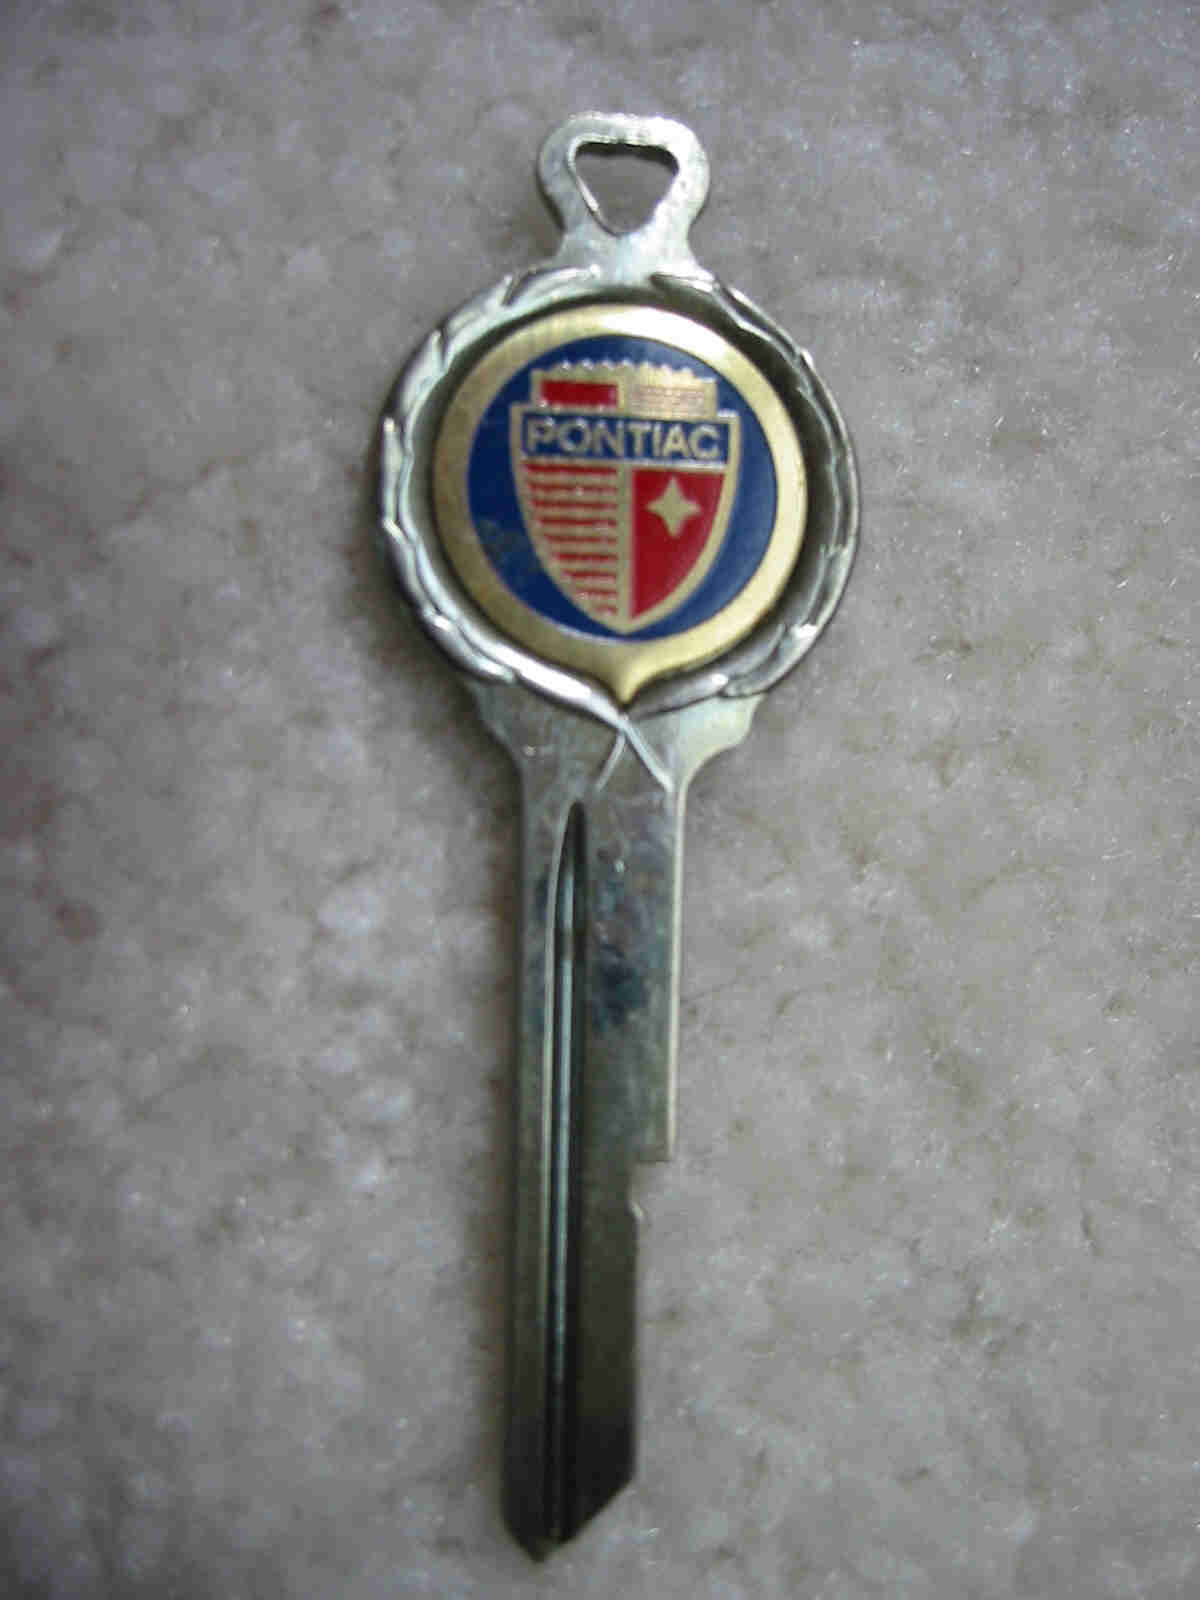 Pontiac Crest Key Blank - A Groove (1966 and Older)